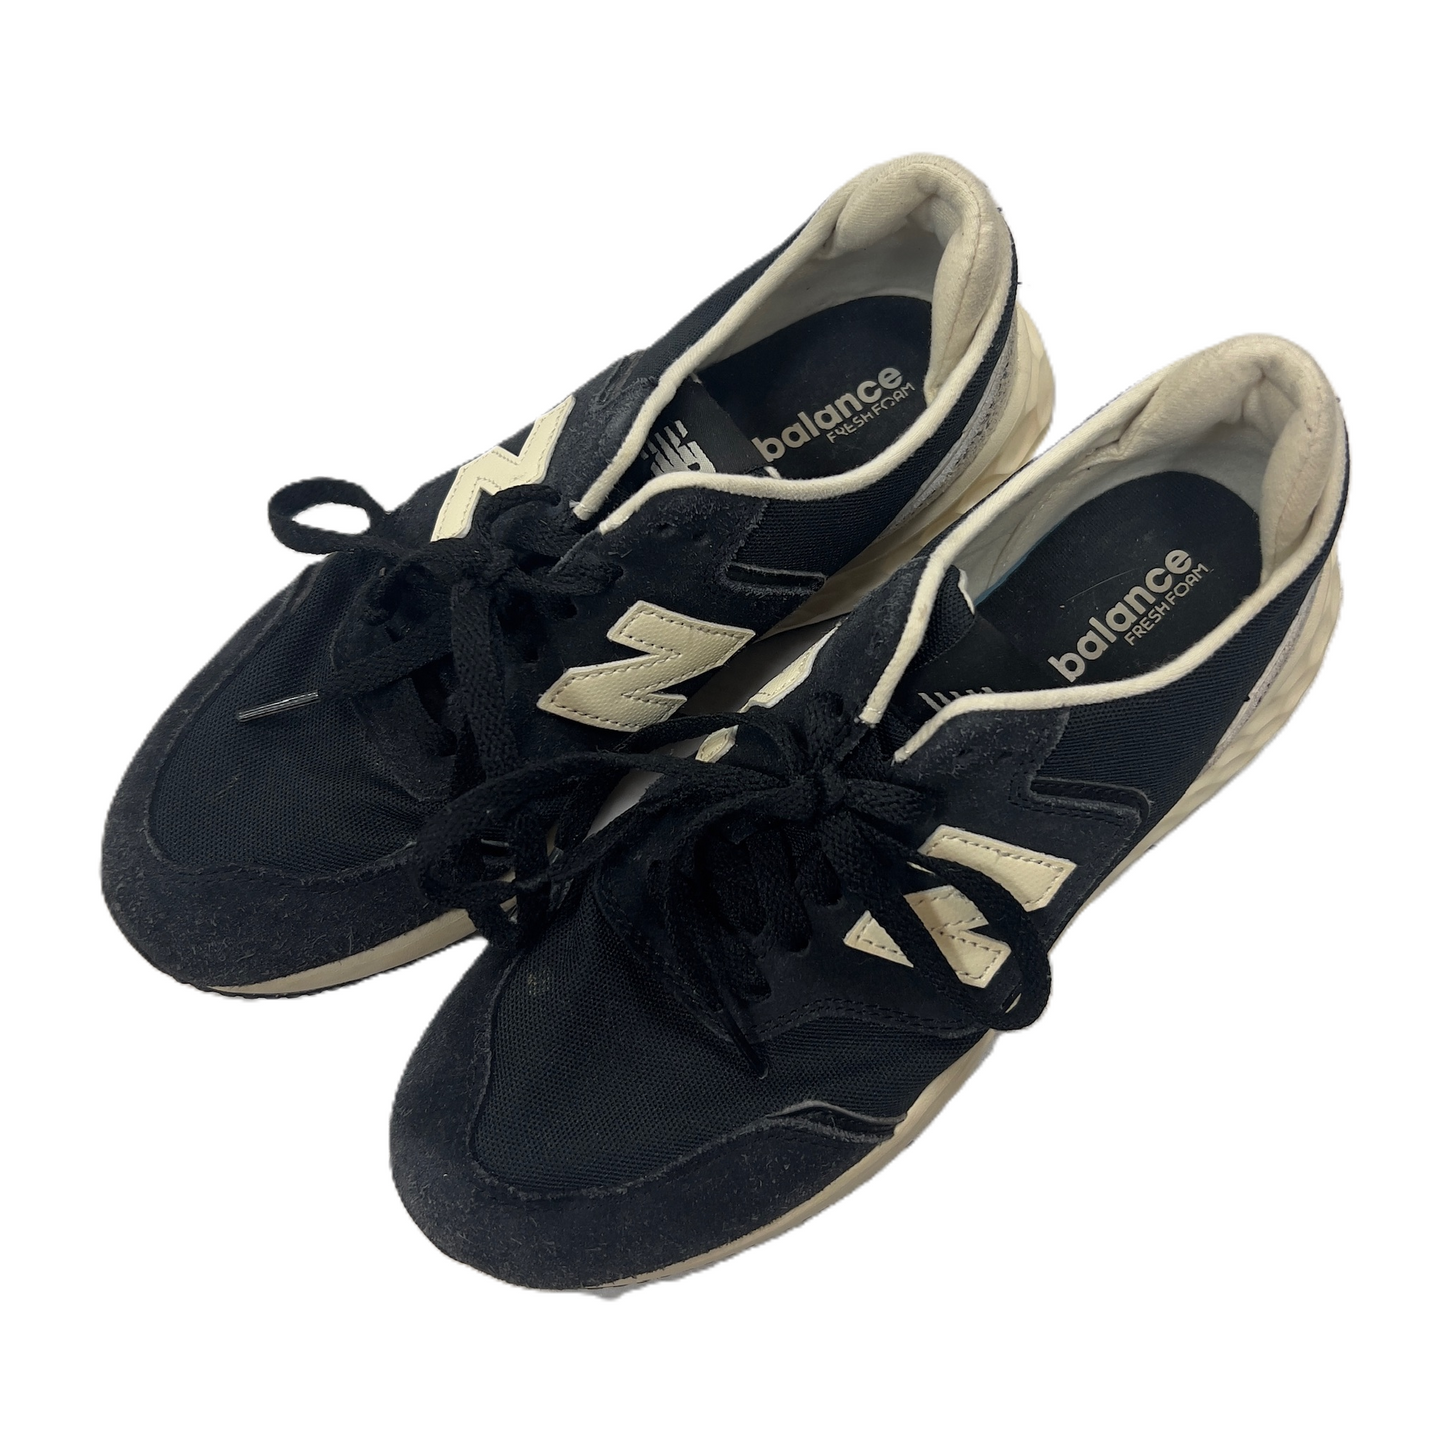 Black Shoes Athletic By New Balance, Size: 8.5